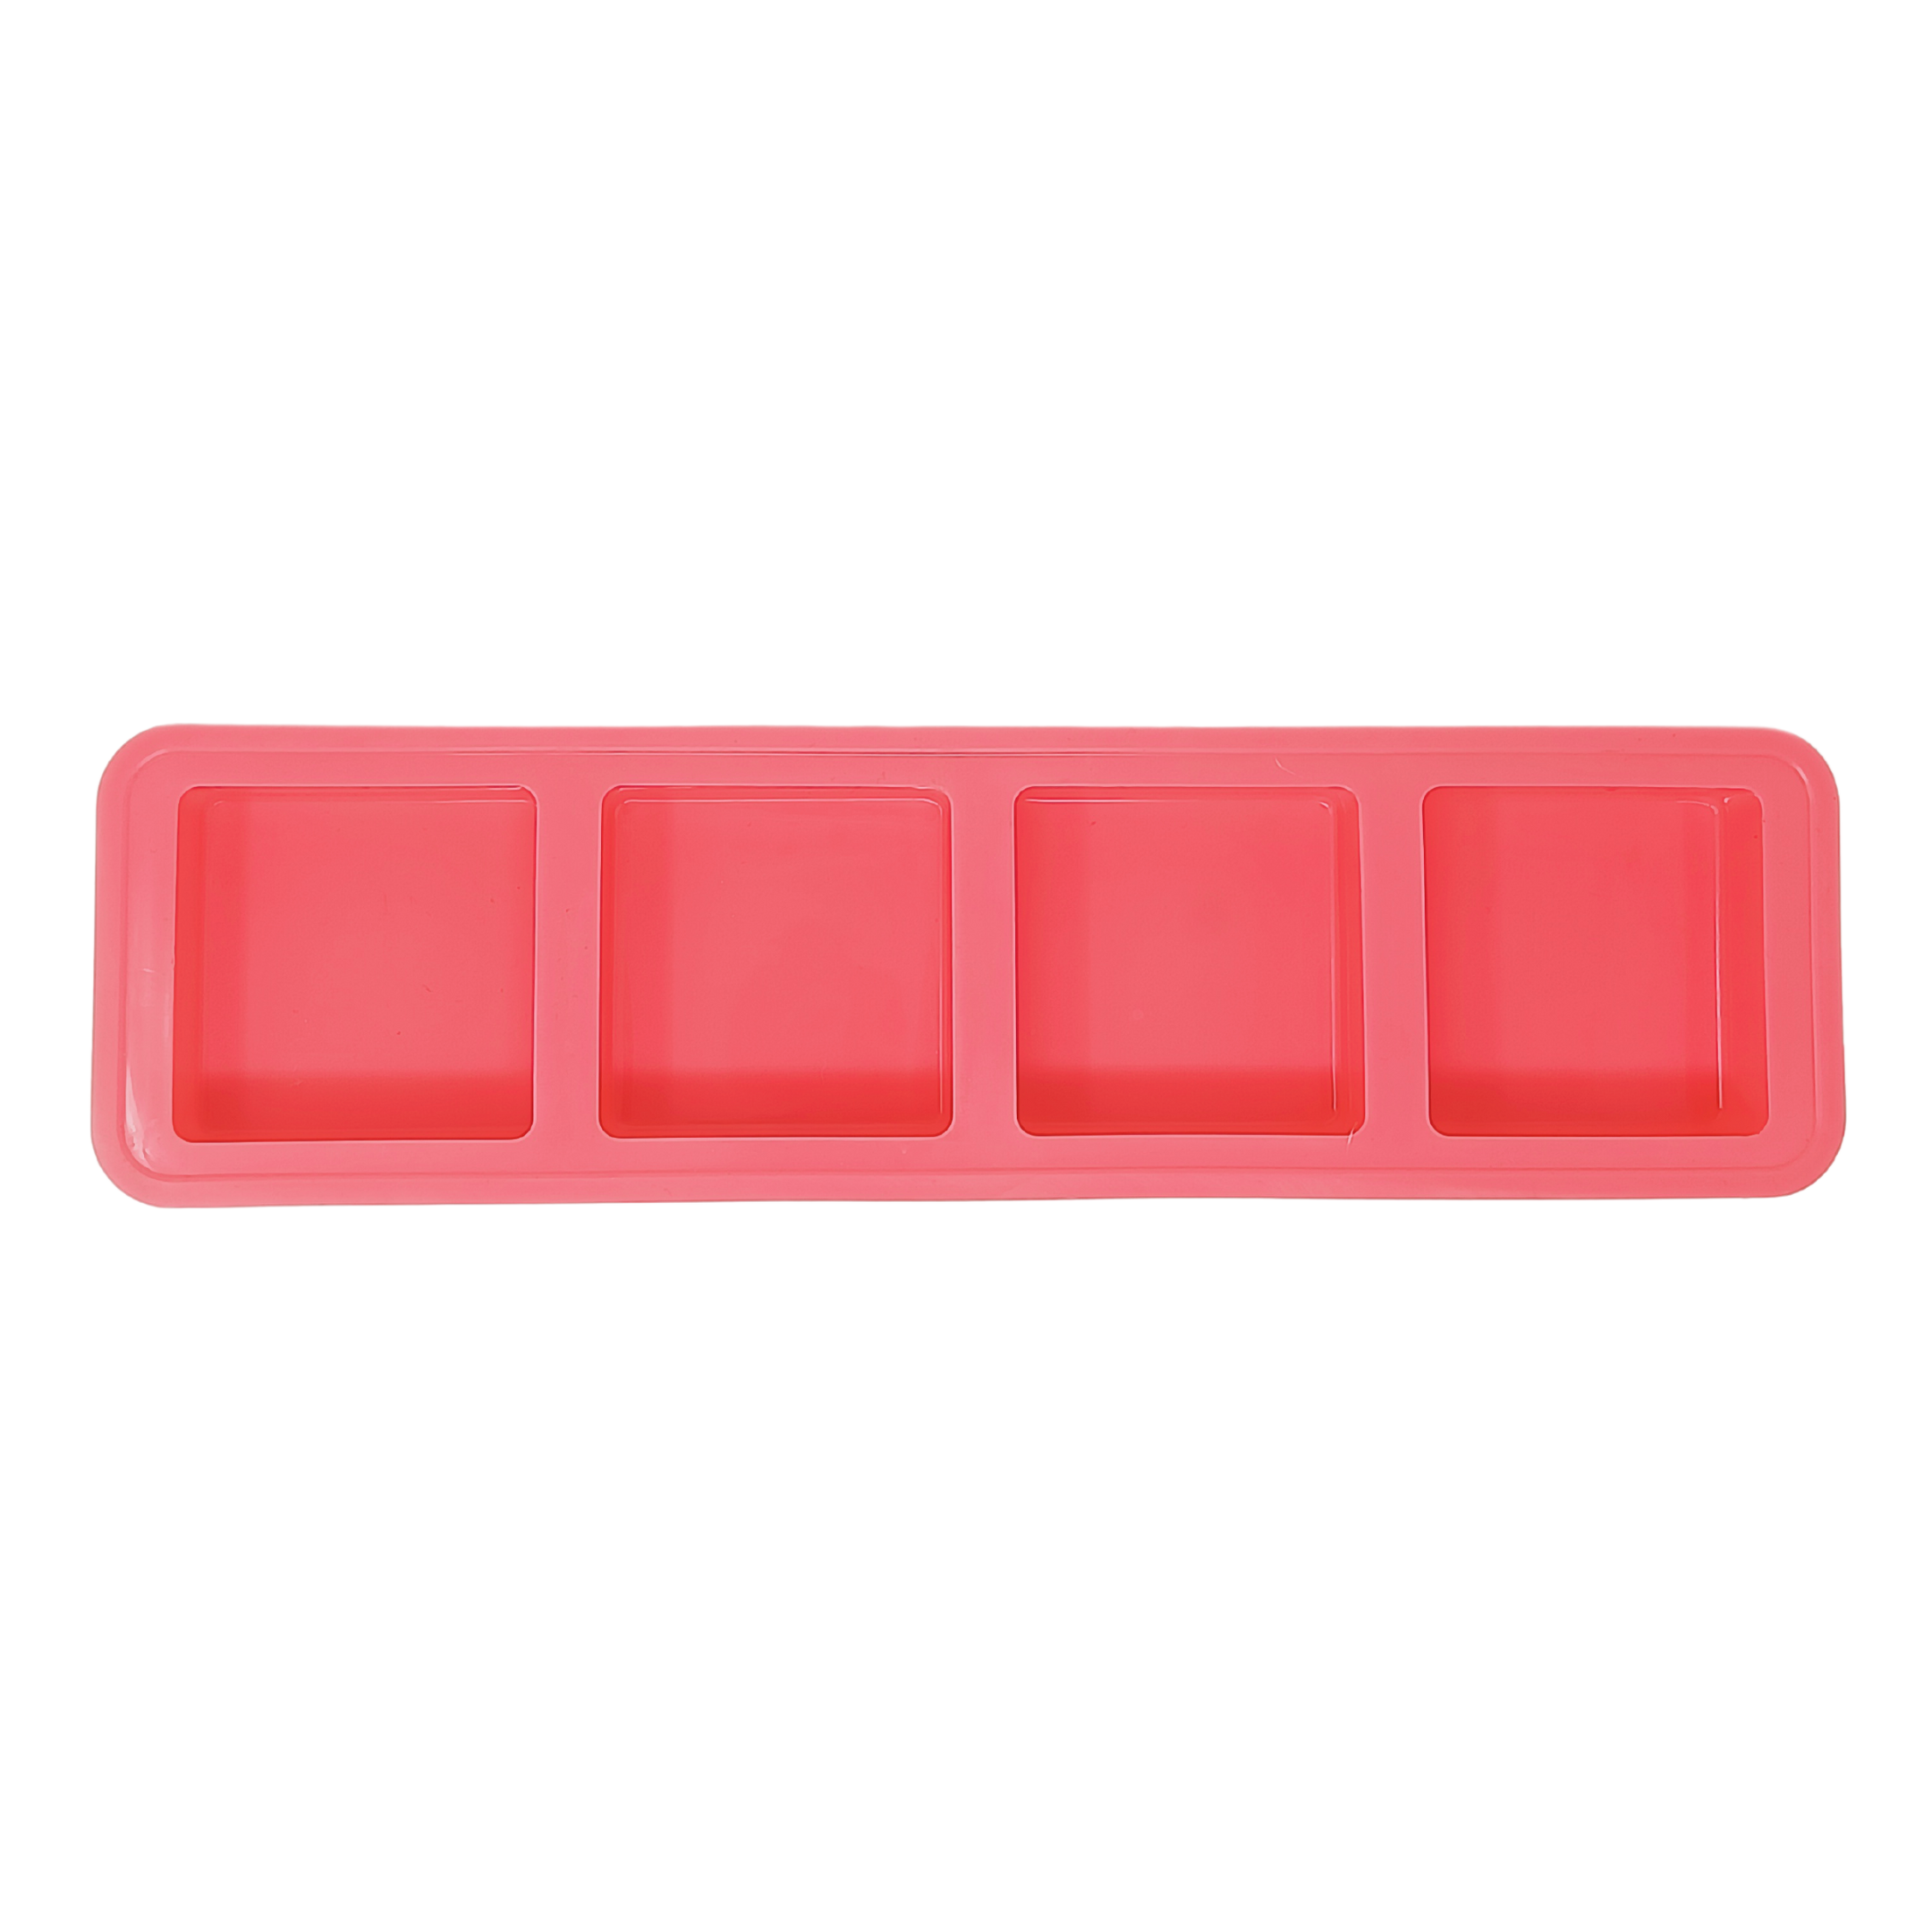 100ml Square Soap Mould - The Mould Story